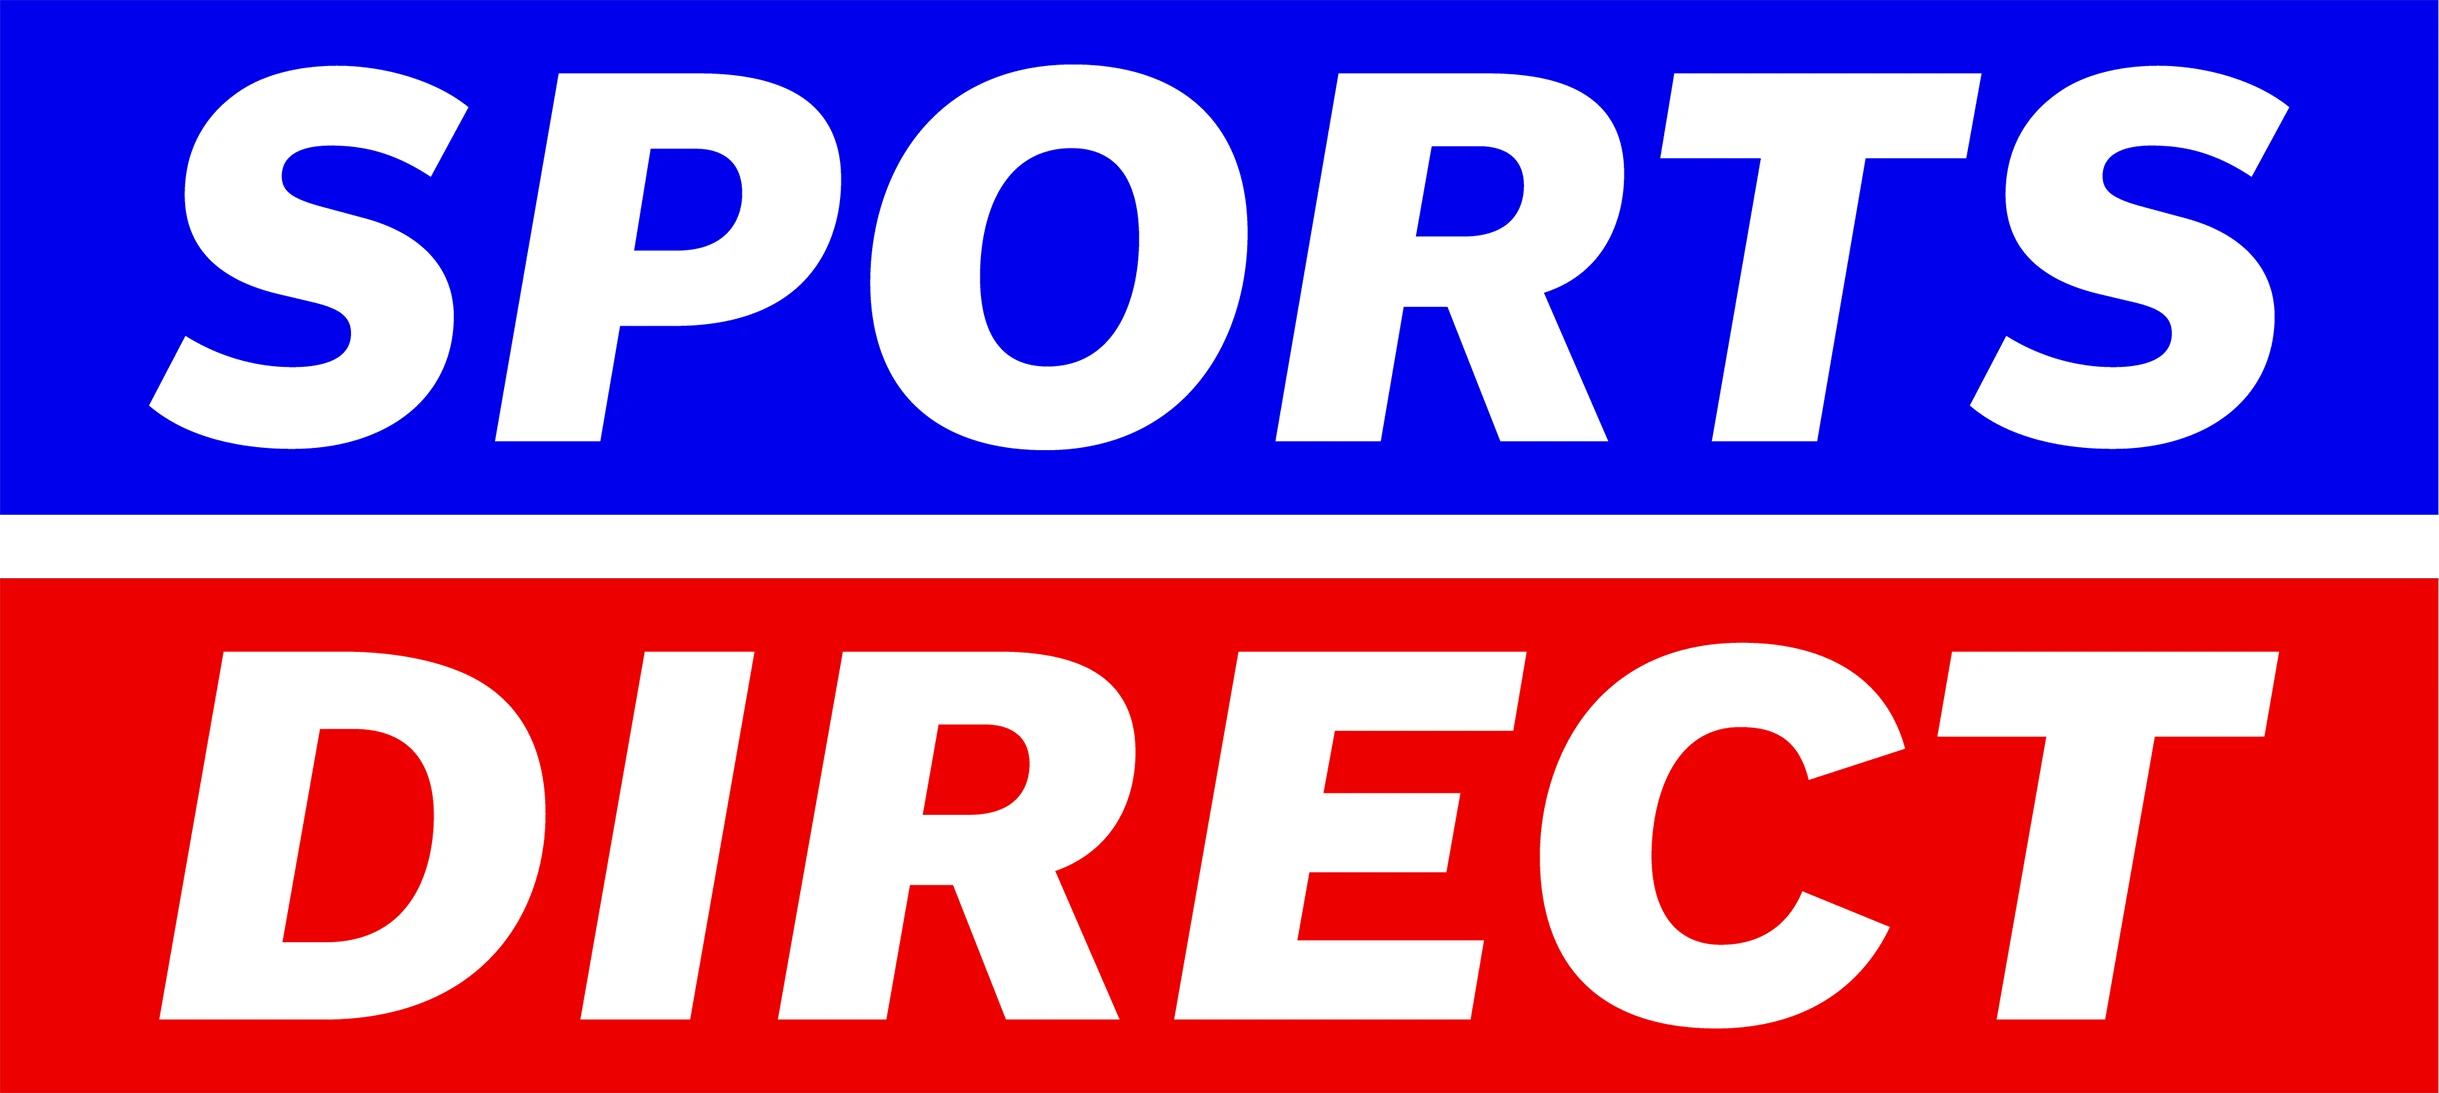 SPORTS DIRECT Promotiecodes 